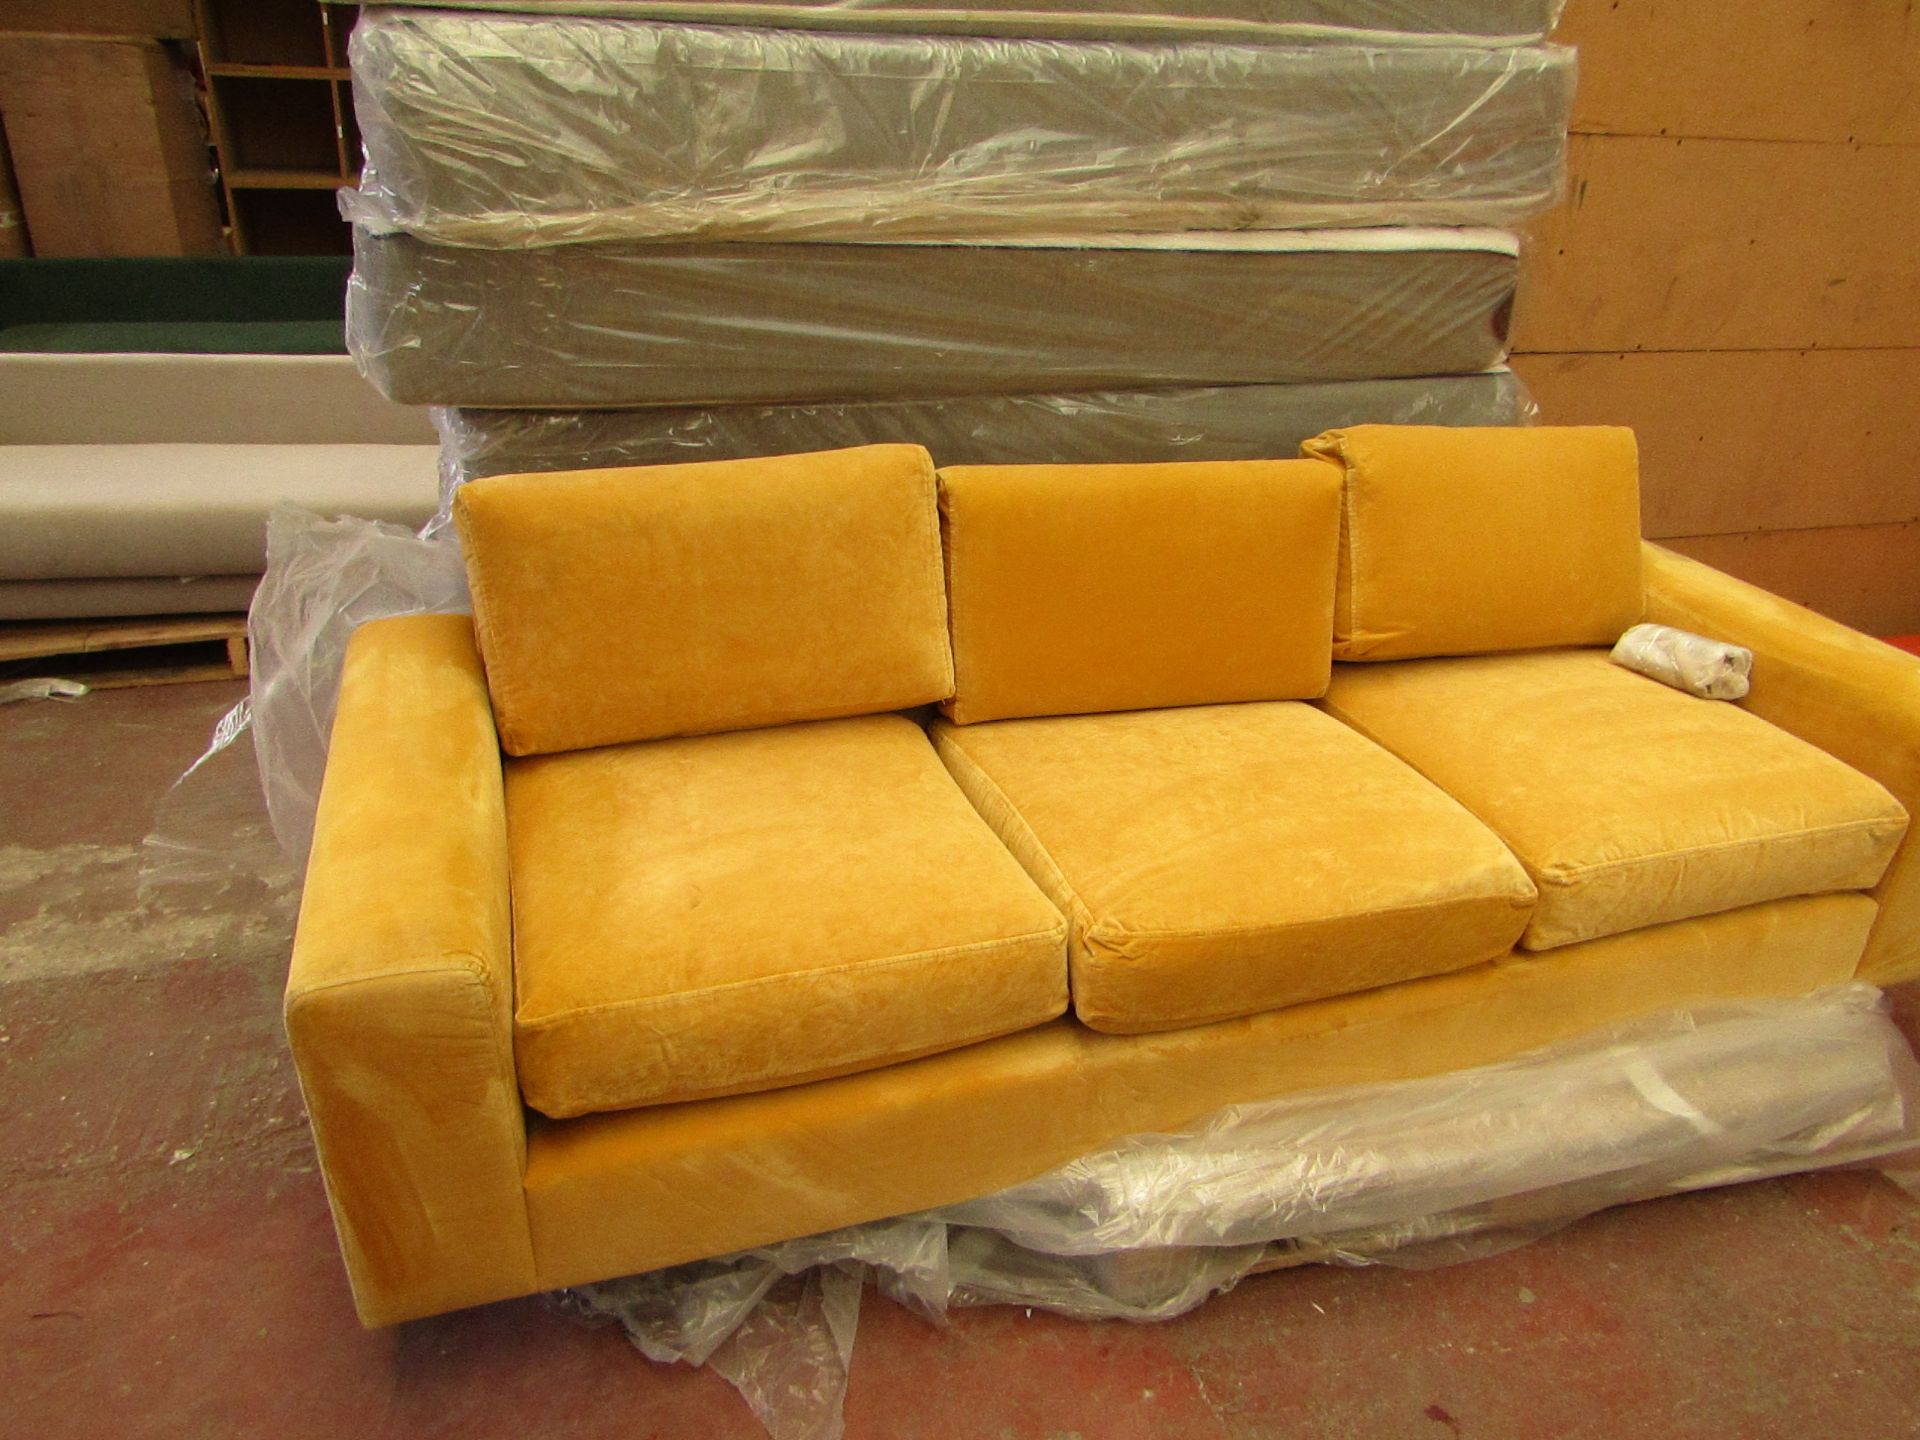 | 1X | SWOON MALVERN 3 SEATER SOFA IN YELLOW | HAS A COUPLE OF SMALL DIRTY MARKS, COMES WITH FEET,